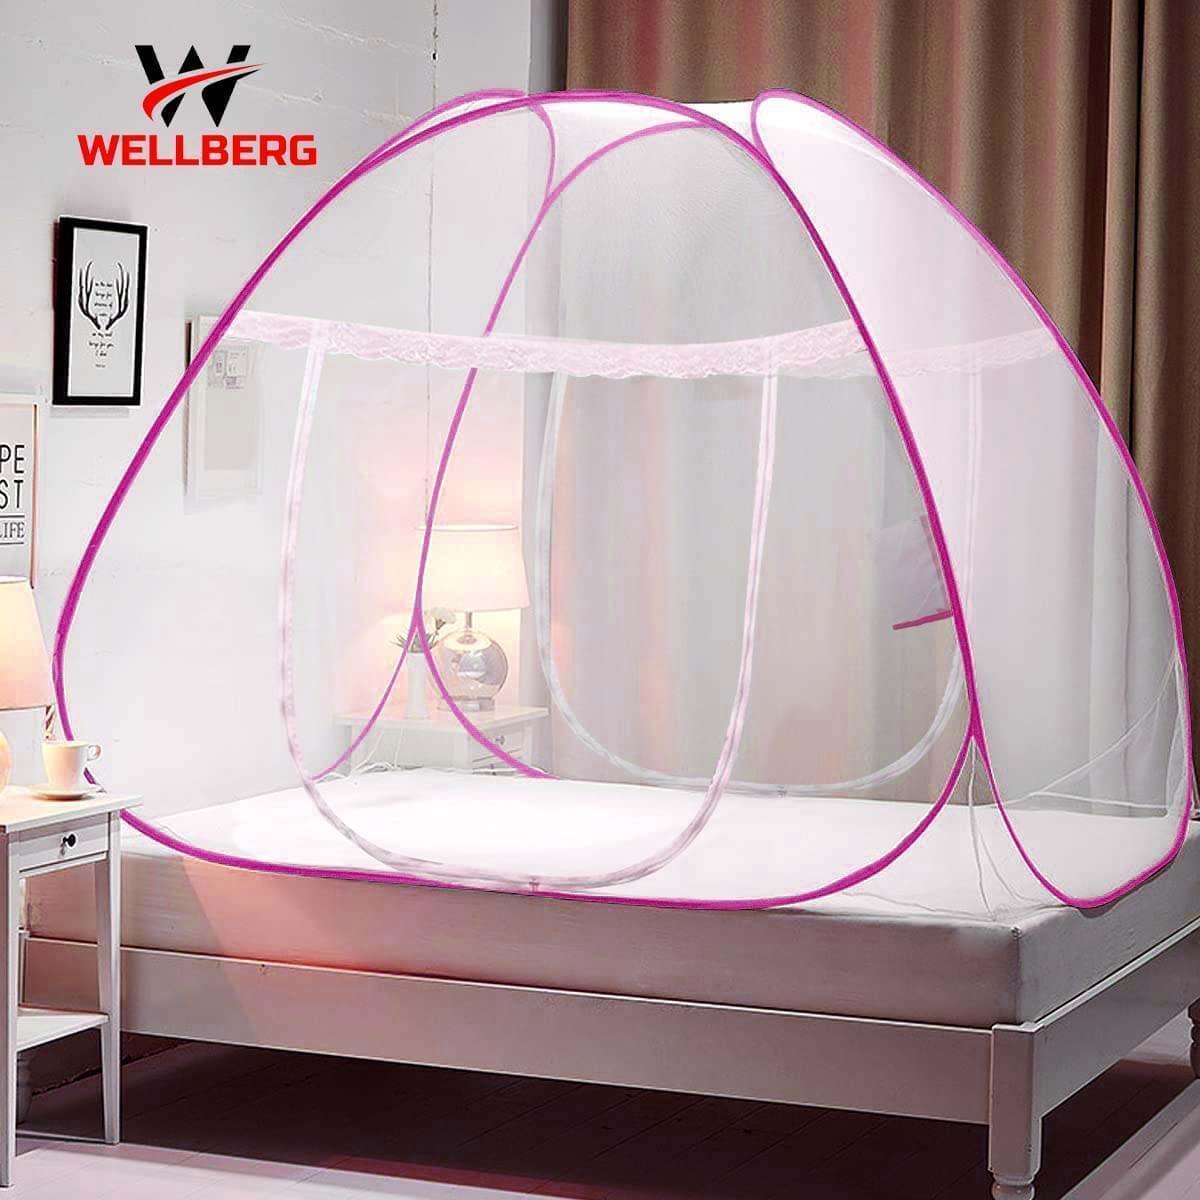 Wellberg Mosquito Net, Double Bed (King Size, 24-30 GSM, Foldable, Highly Durable) - Pink - WELLBERG